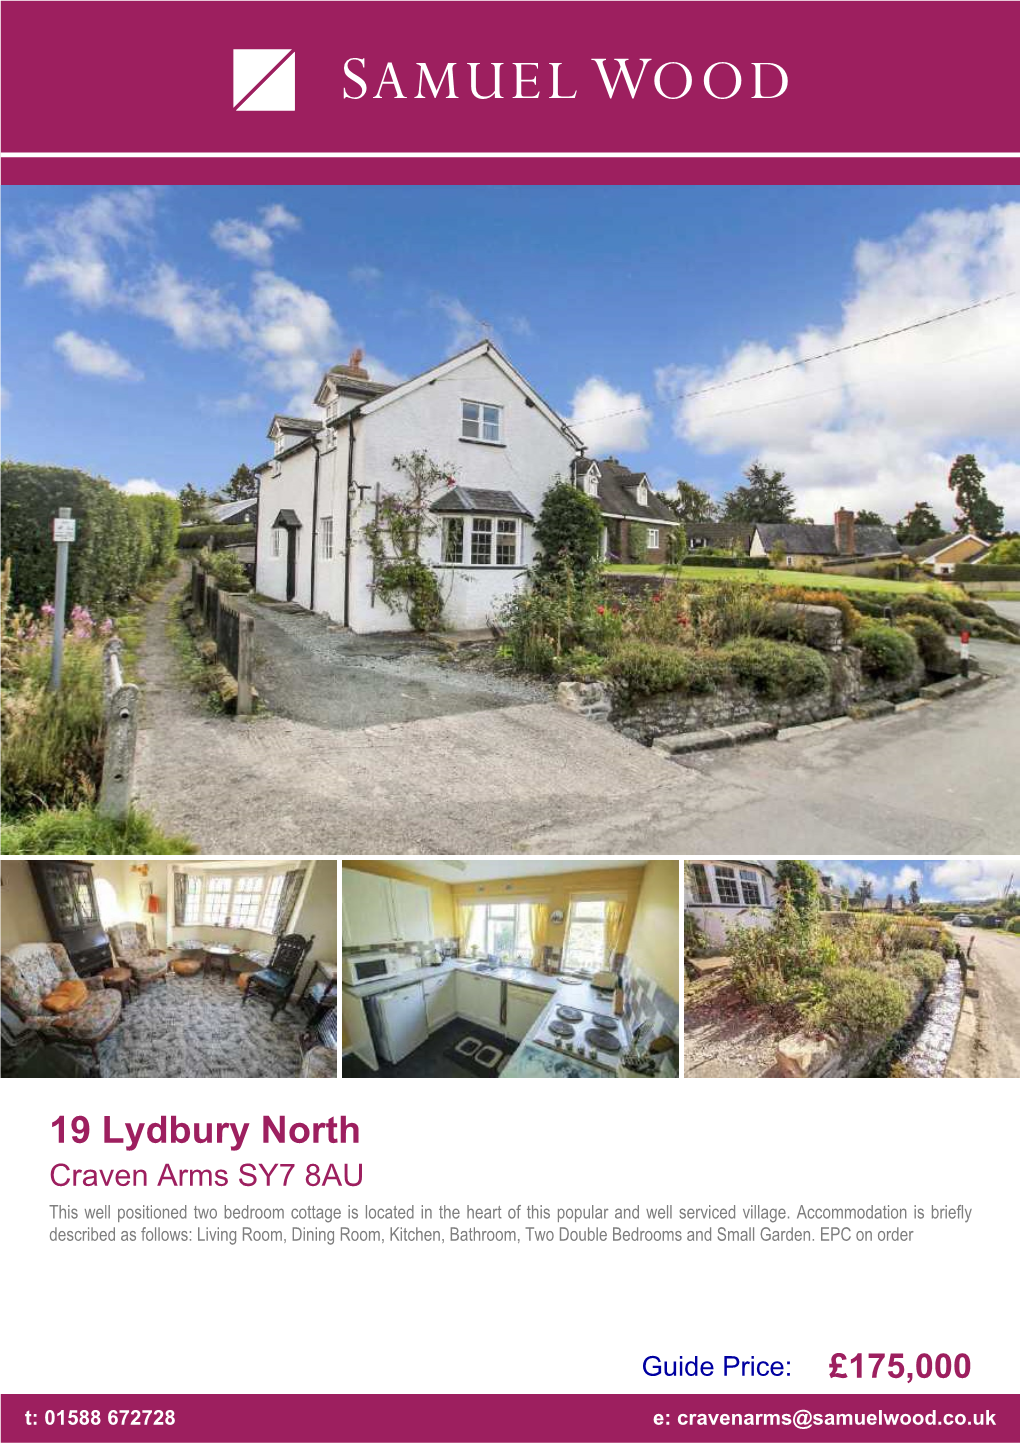 19 Lydbury North Craven Arms SY7 8AU This Well Positioned Two Bedroom Cottage Is Located in the Heart of This Popular and Well Serviced Village